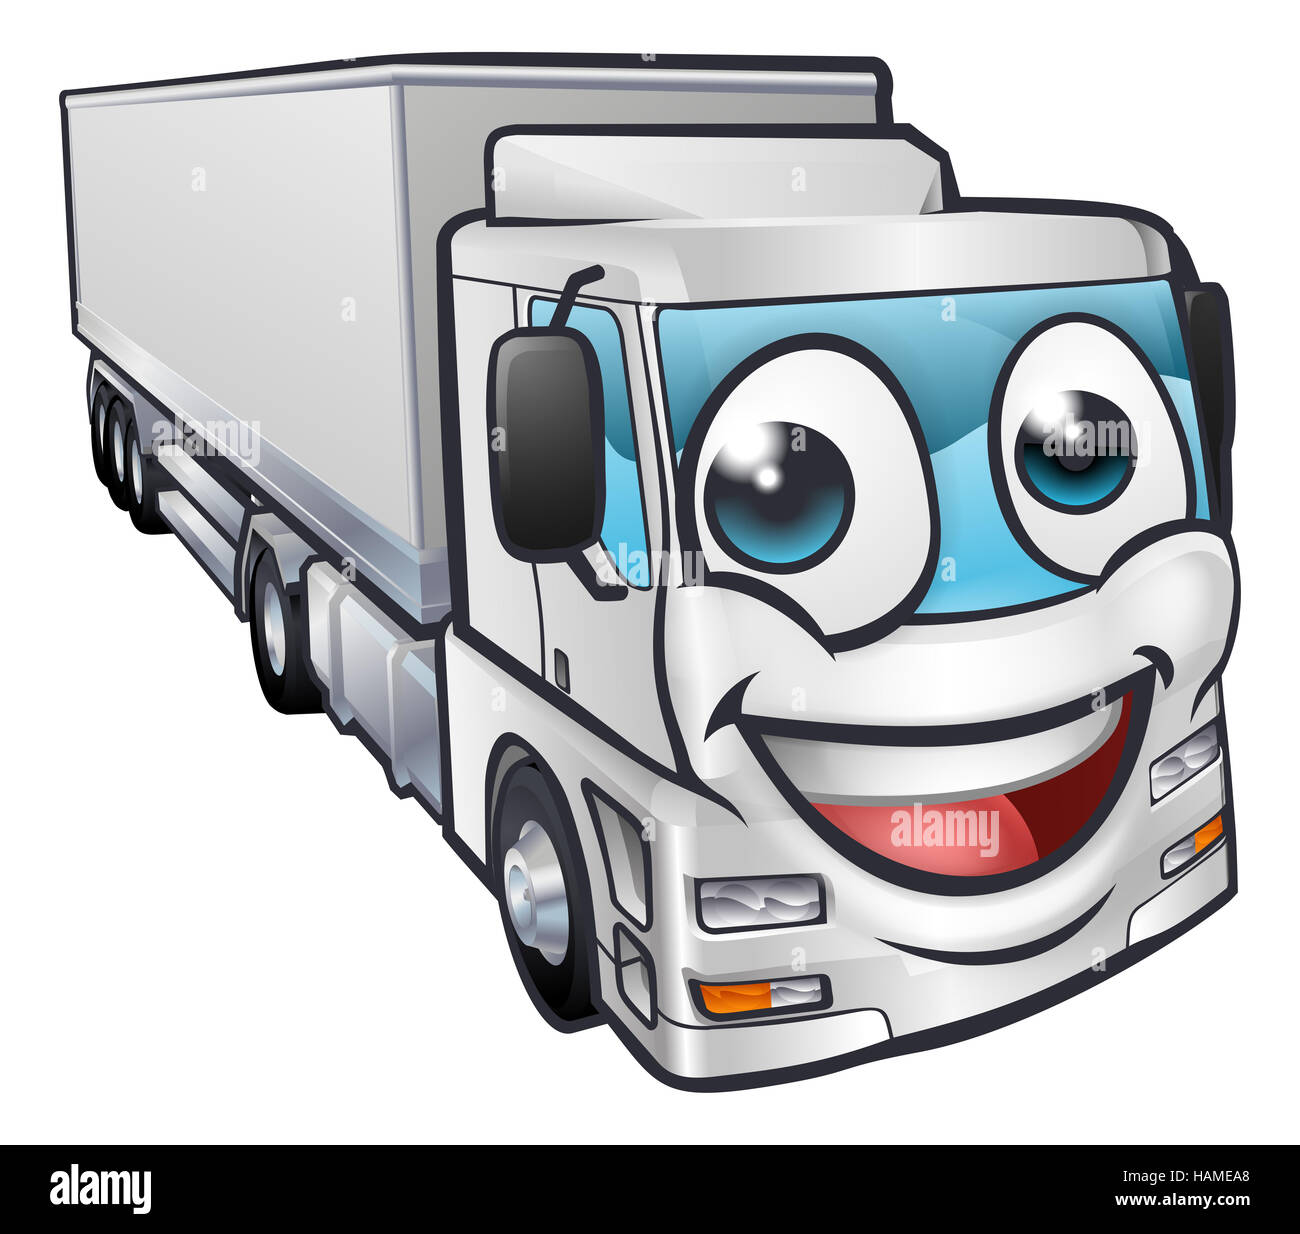 7+ Hundred Cartoon Mud Truck Royalty-Free Images, Stock Photos & Pictures